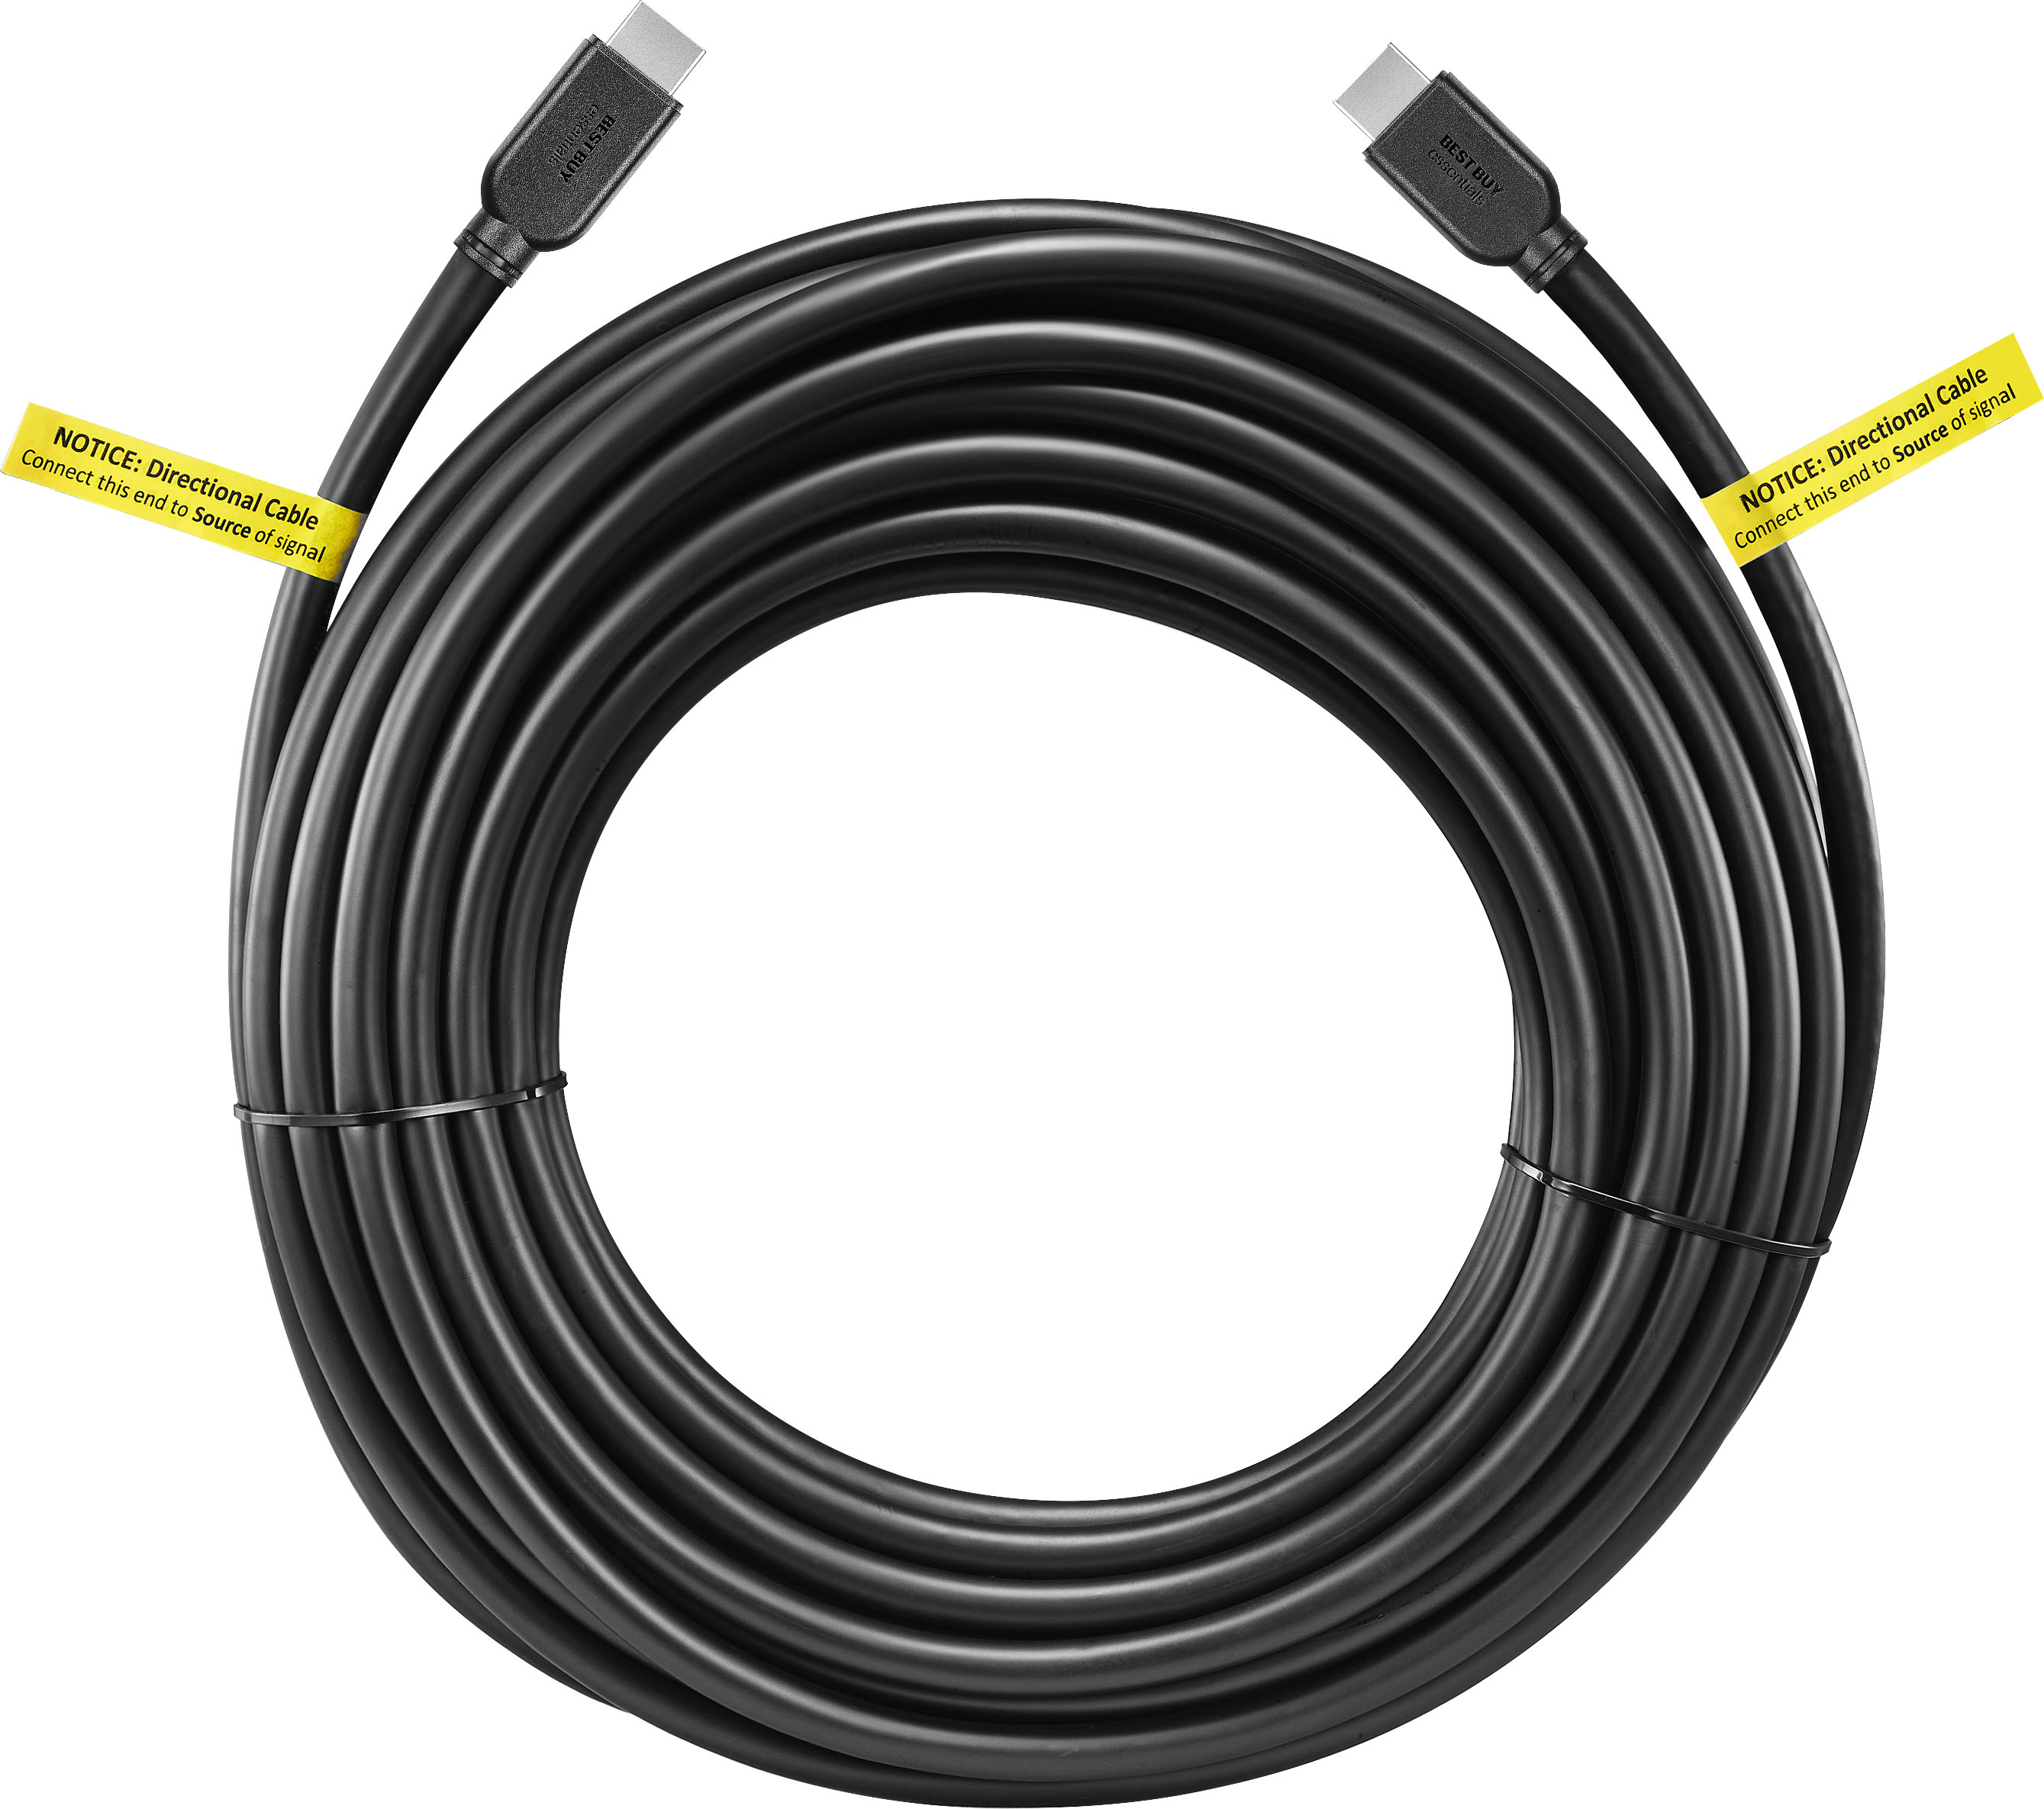 Best Buy essentials™ 12' 4K Ultra HD HDMI Cable Black BE-SF1182